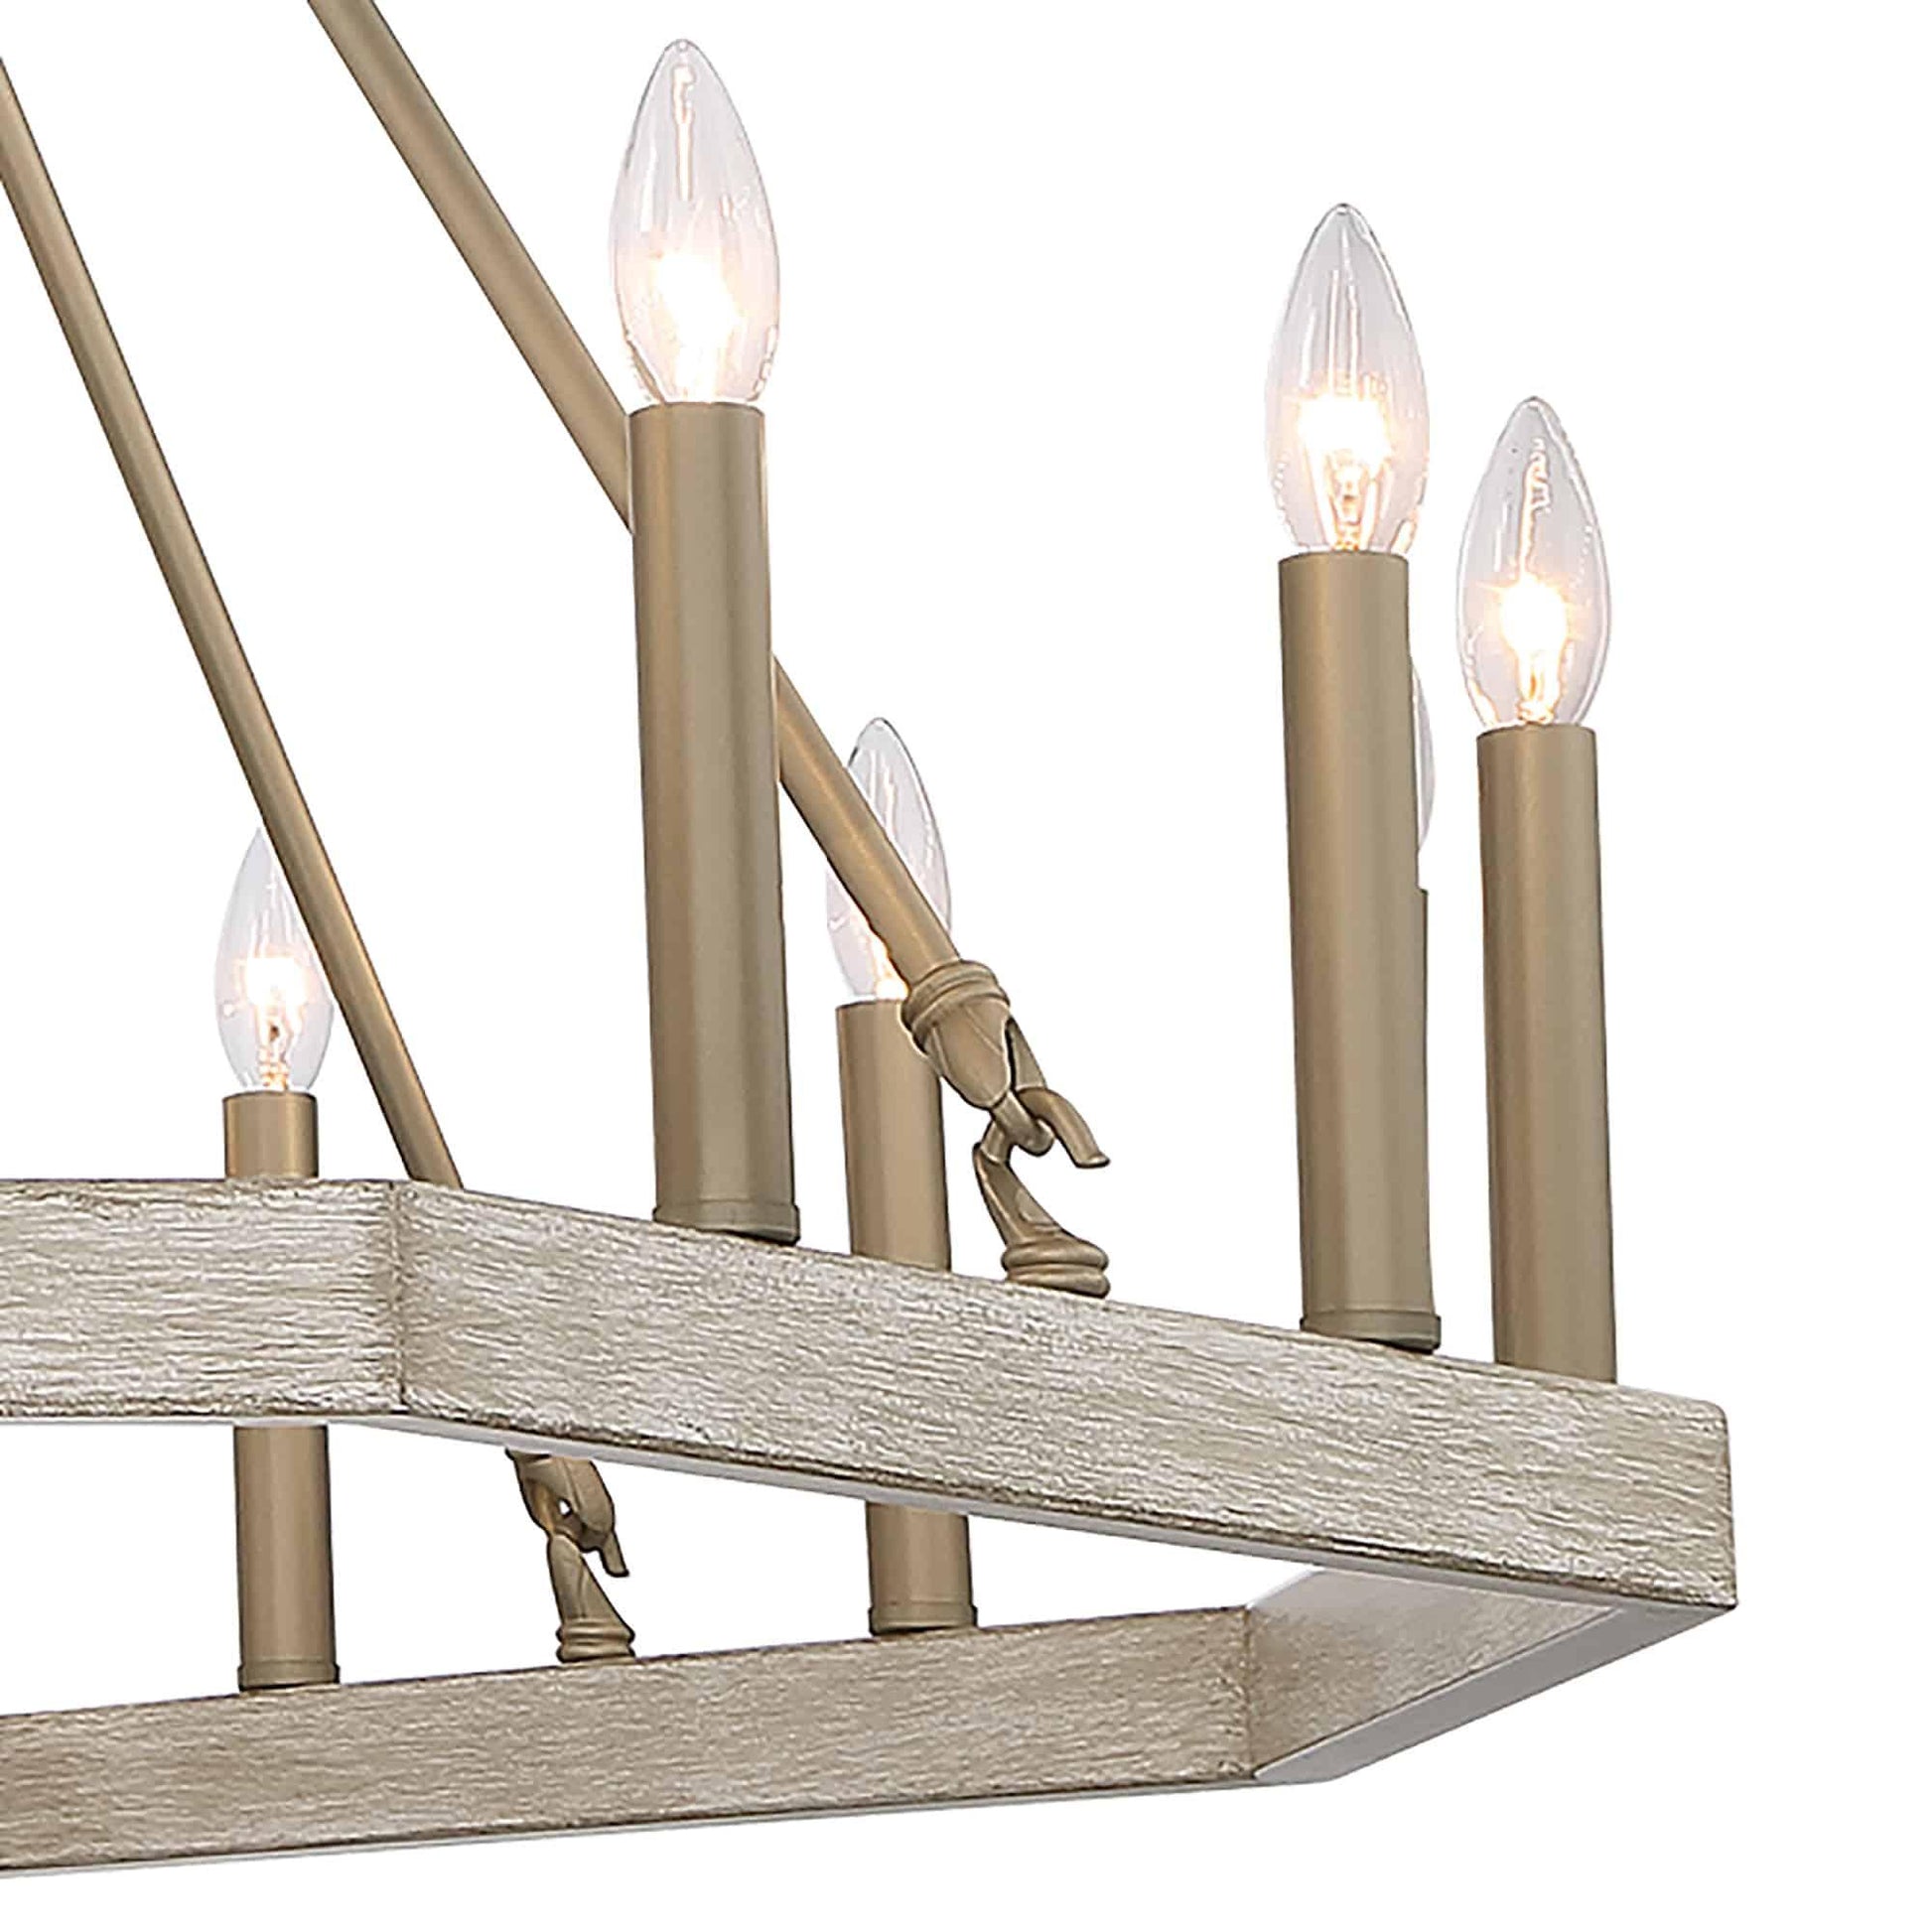 16 light candle style wagon wheel chandelier 1 (18) by ACROMA